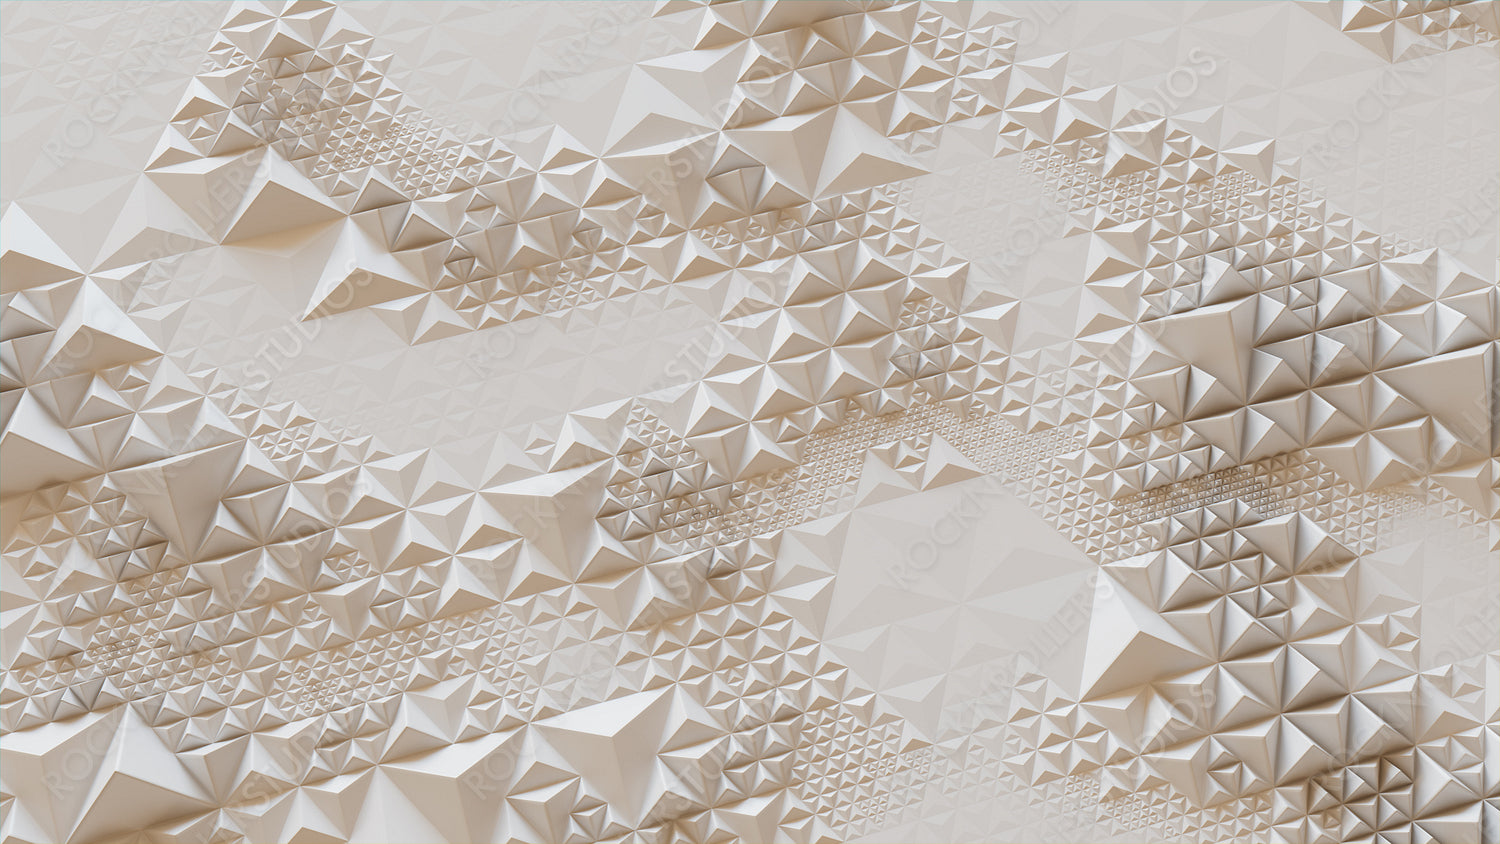 Light High Tech Surface with Tetrahedrons. White, Polygonal 3d Banner.